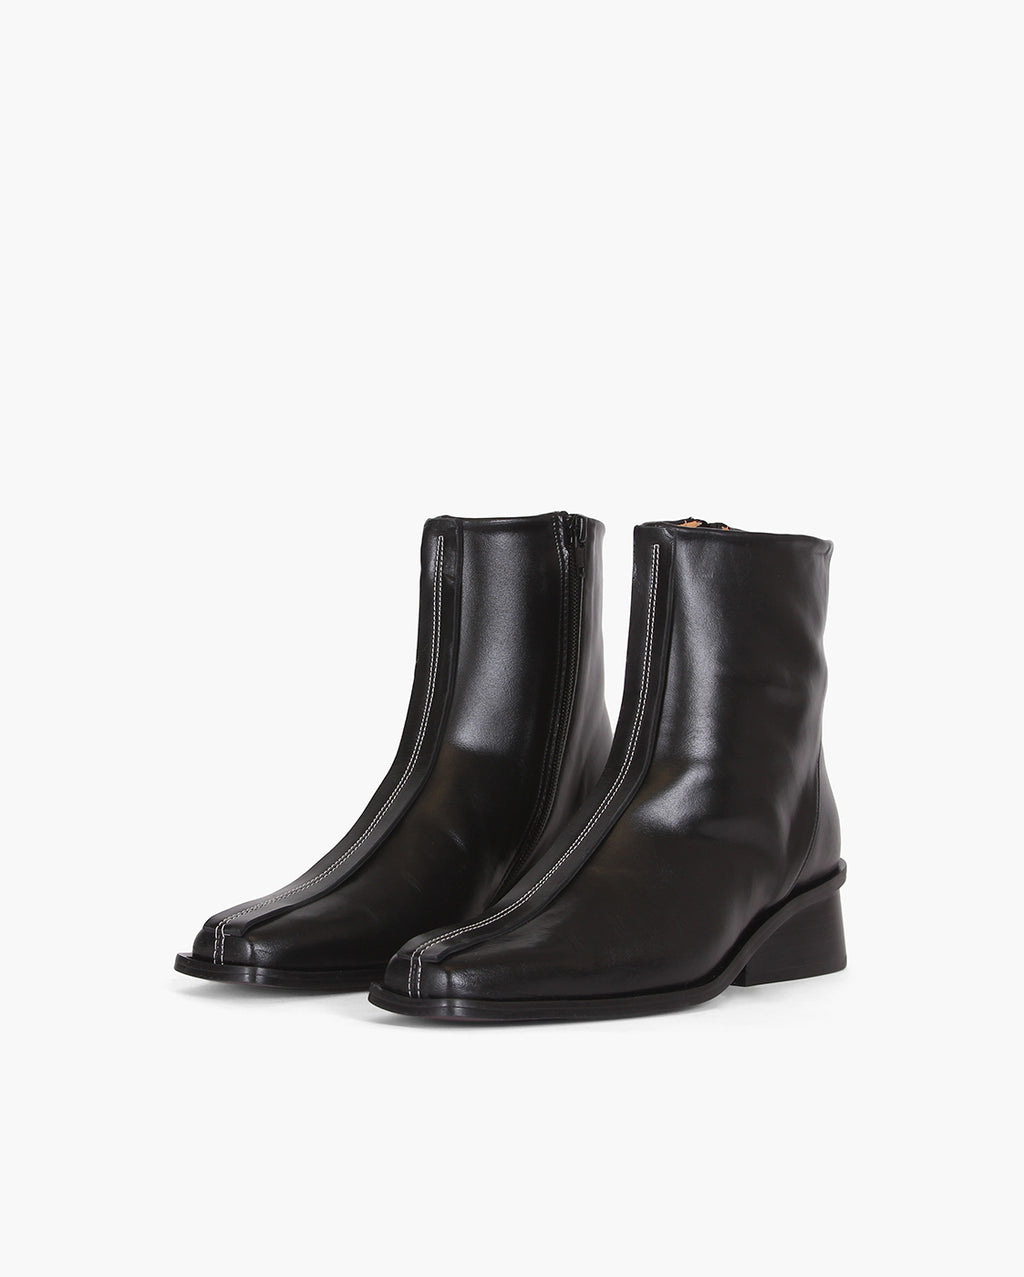 Miki Boot 35mm Leather Black